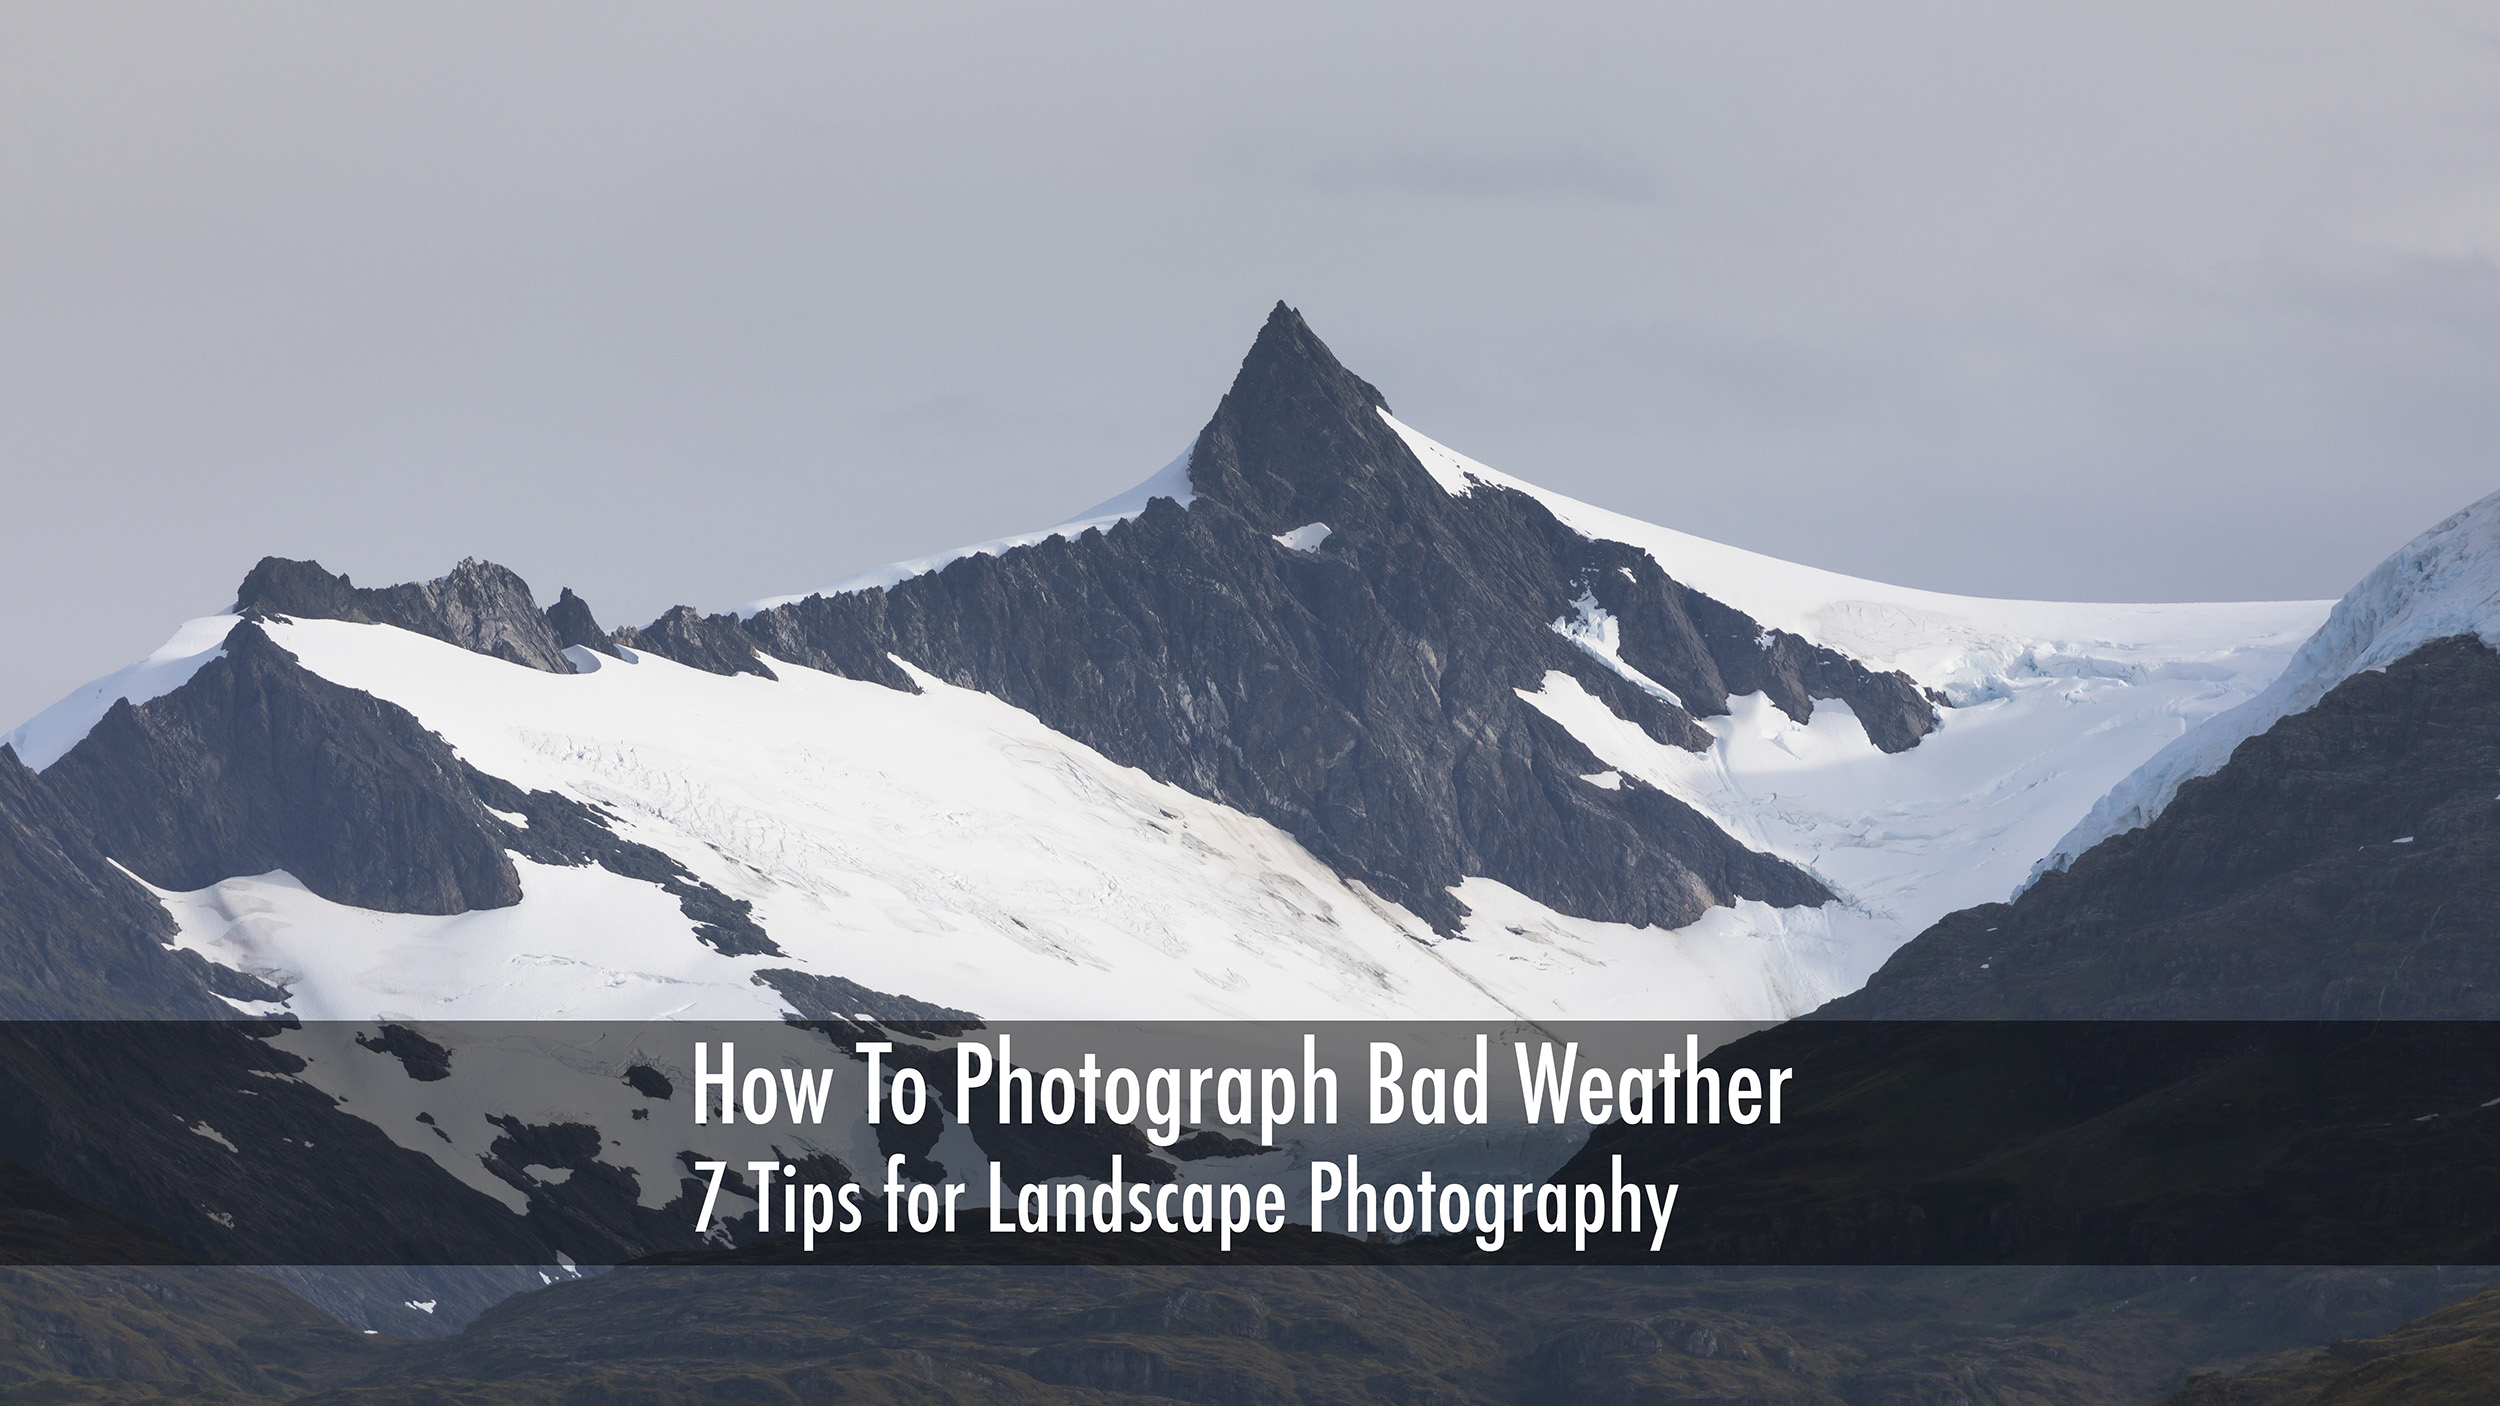 How to photograph bad weather. 7 tips for landscape photography.